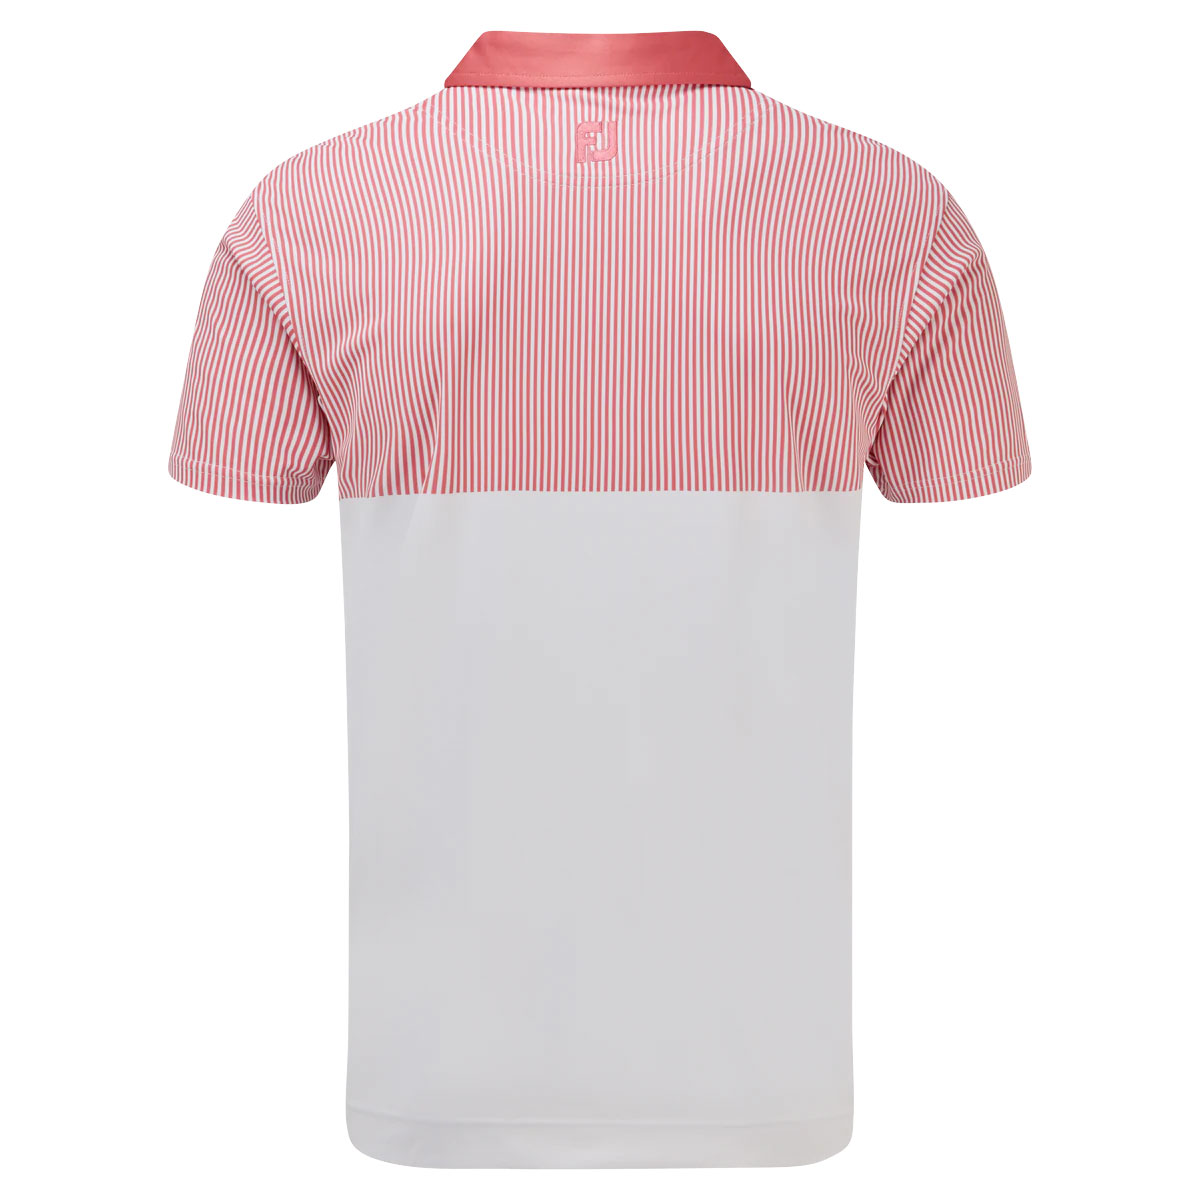 FootJoy Smooth Pique Engineered Vertical Print Mens Golf Polo Shirt  - White/Cape Red